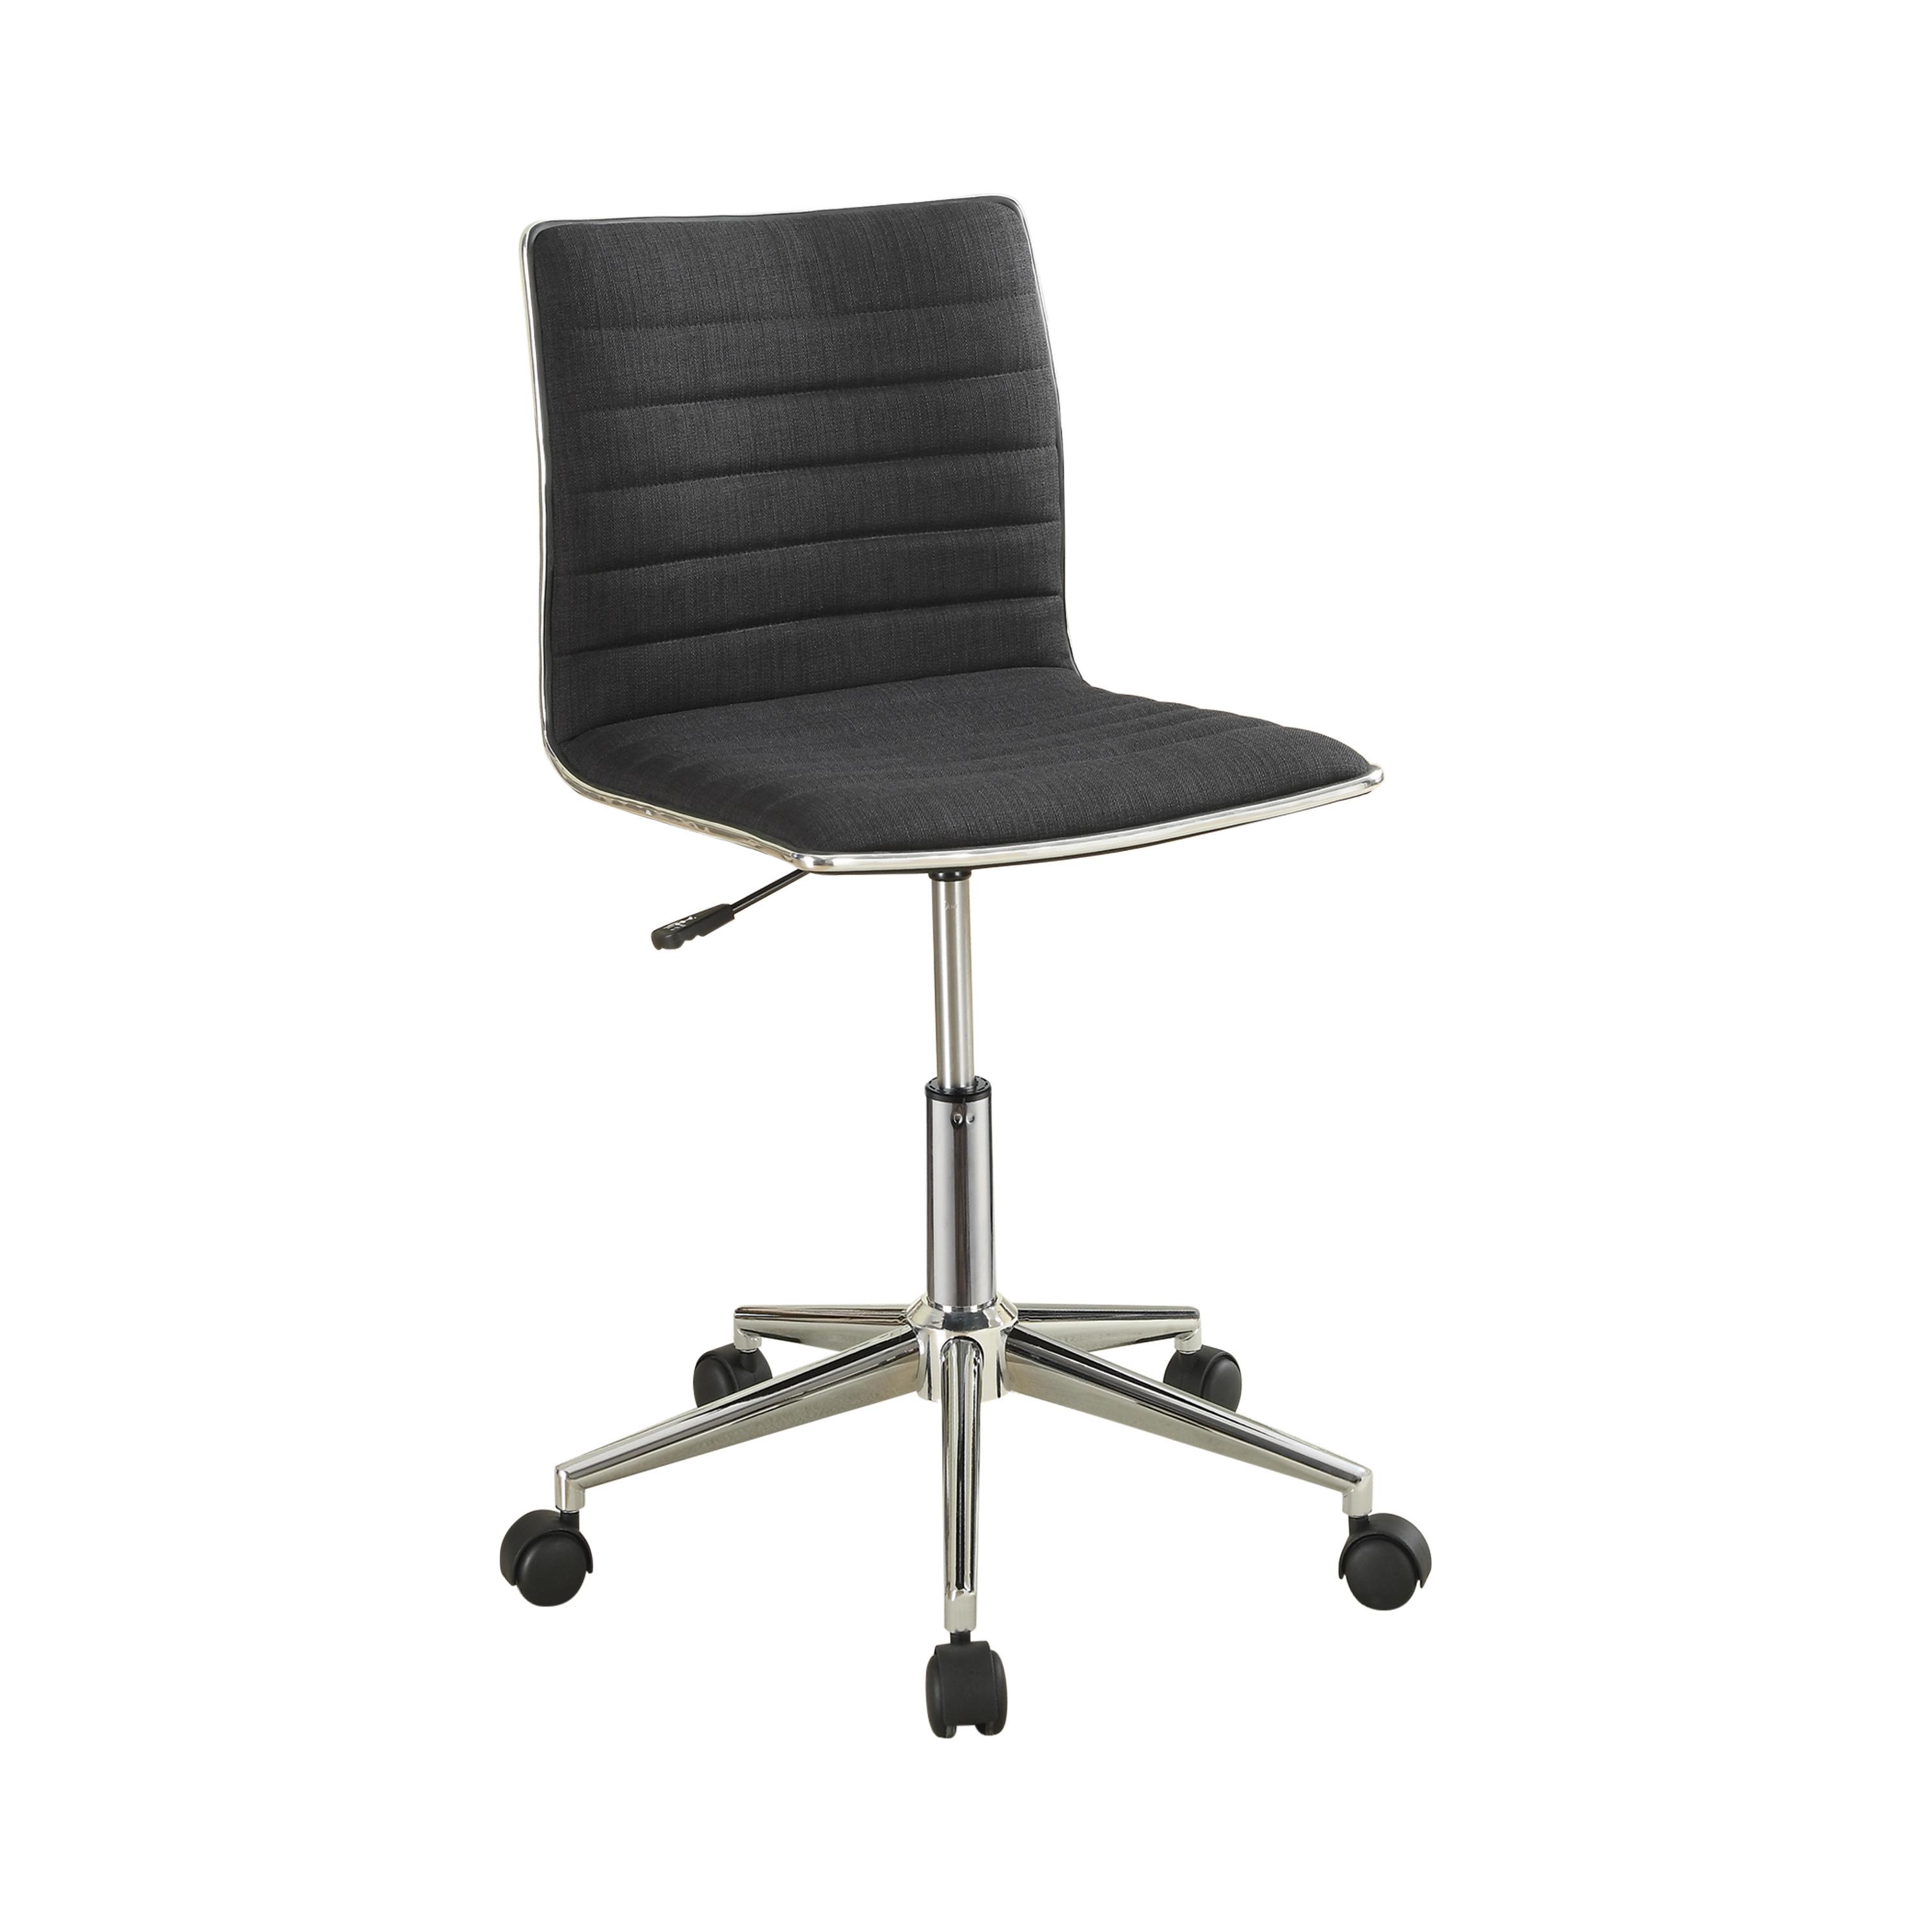 Contemporary Office Chair 800725 800725 in Black Fabric